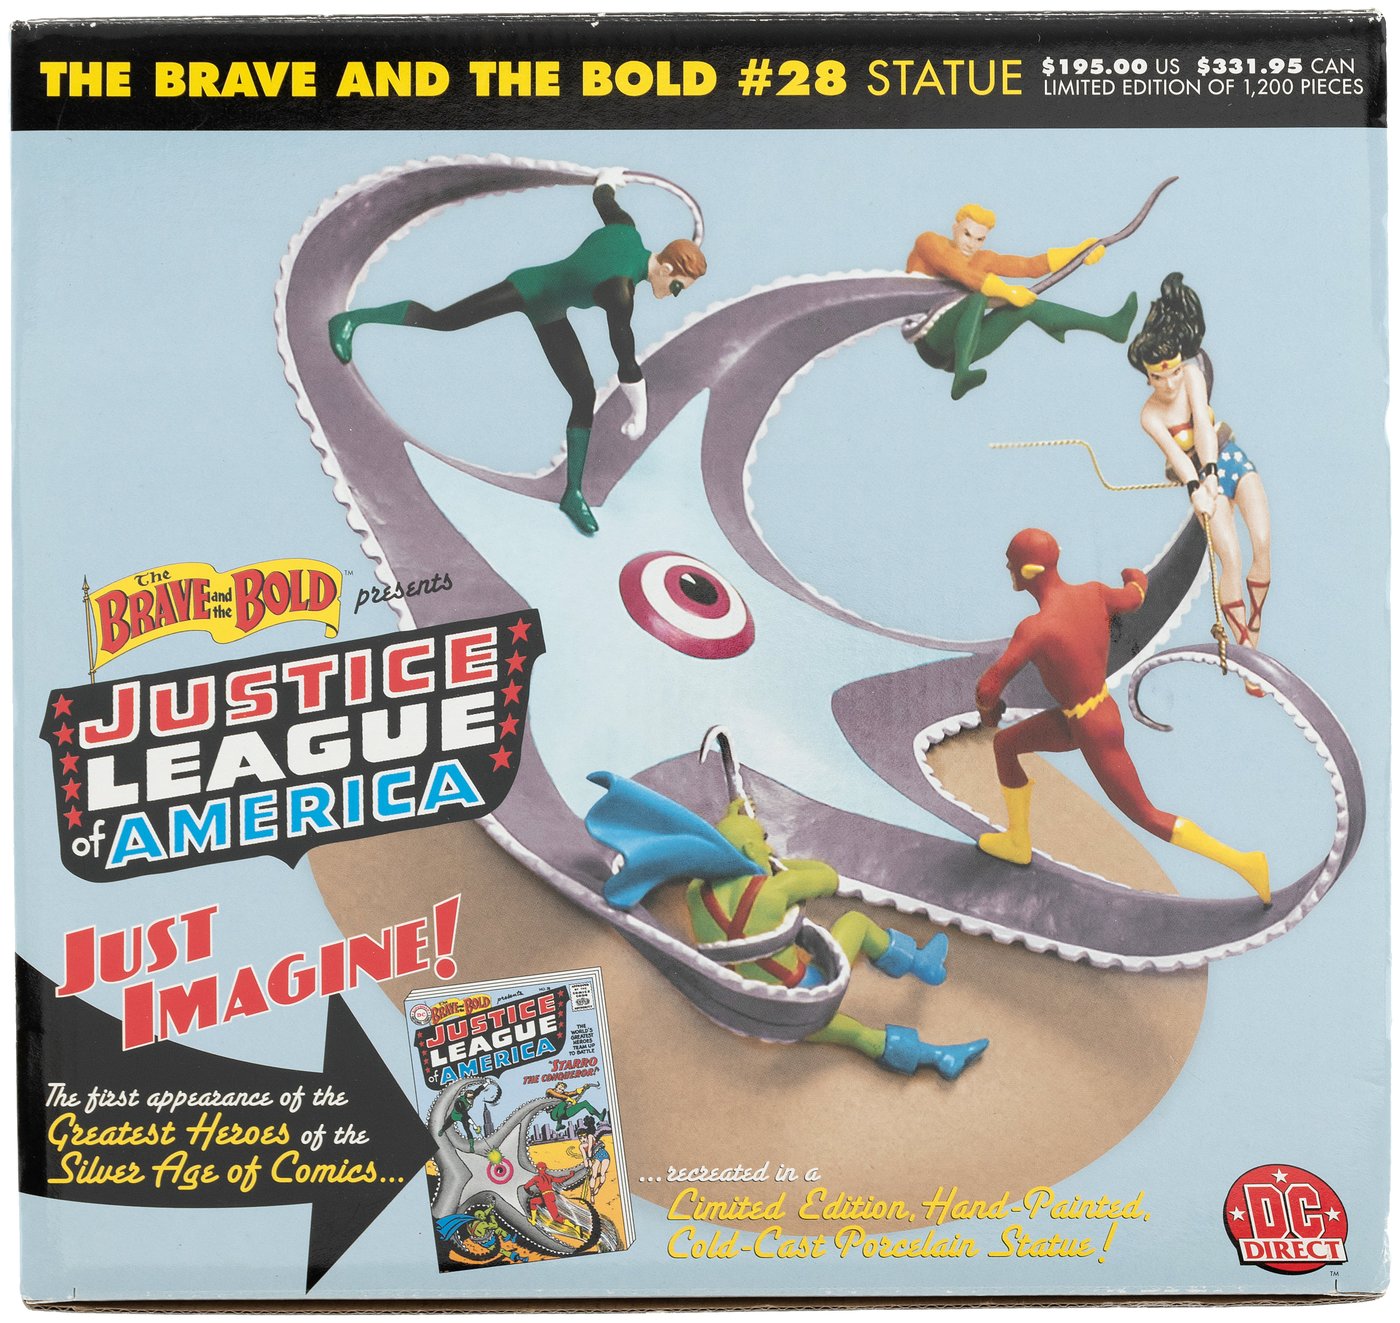 Hake's - JUSTICE LEAGUE OF AMERICA THE BRAVE AND THE BOLD #28 STATUE.